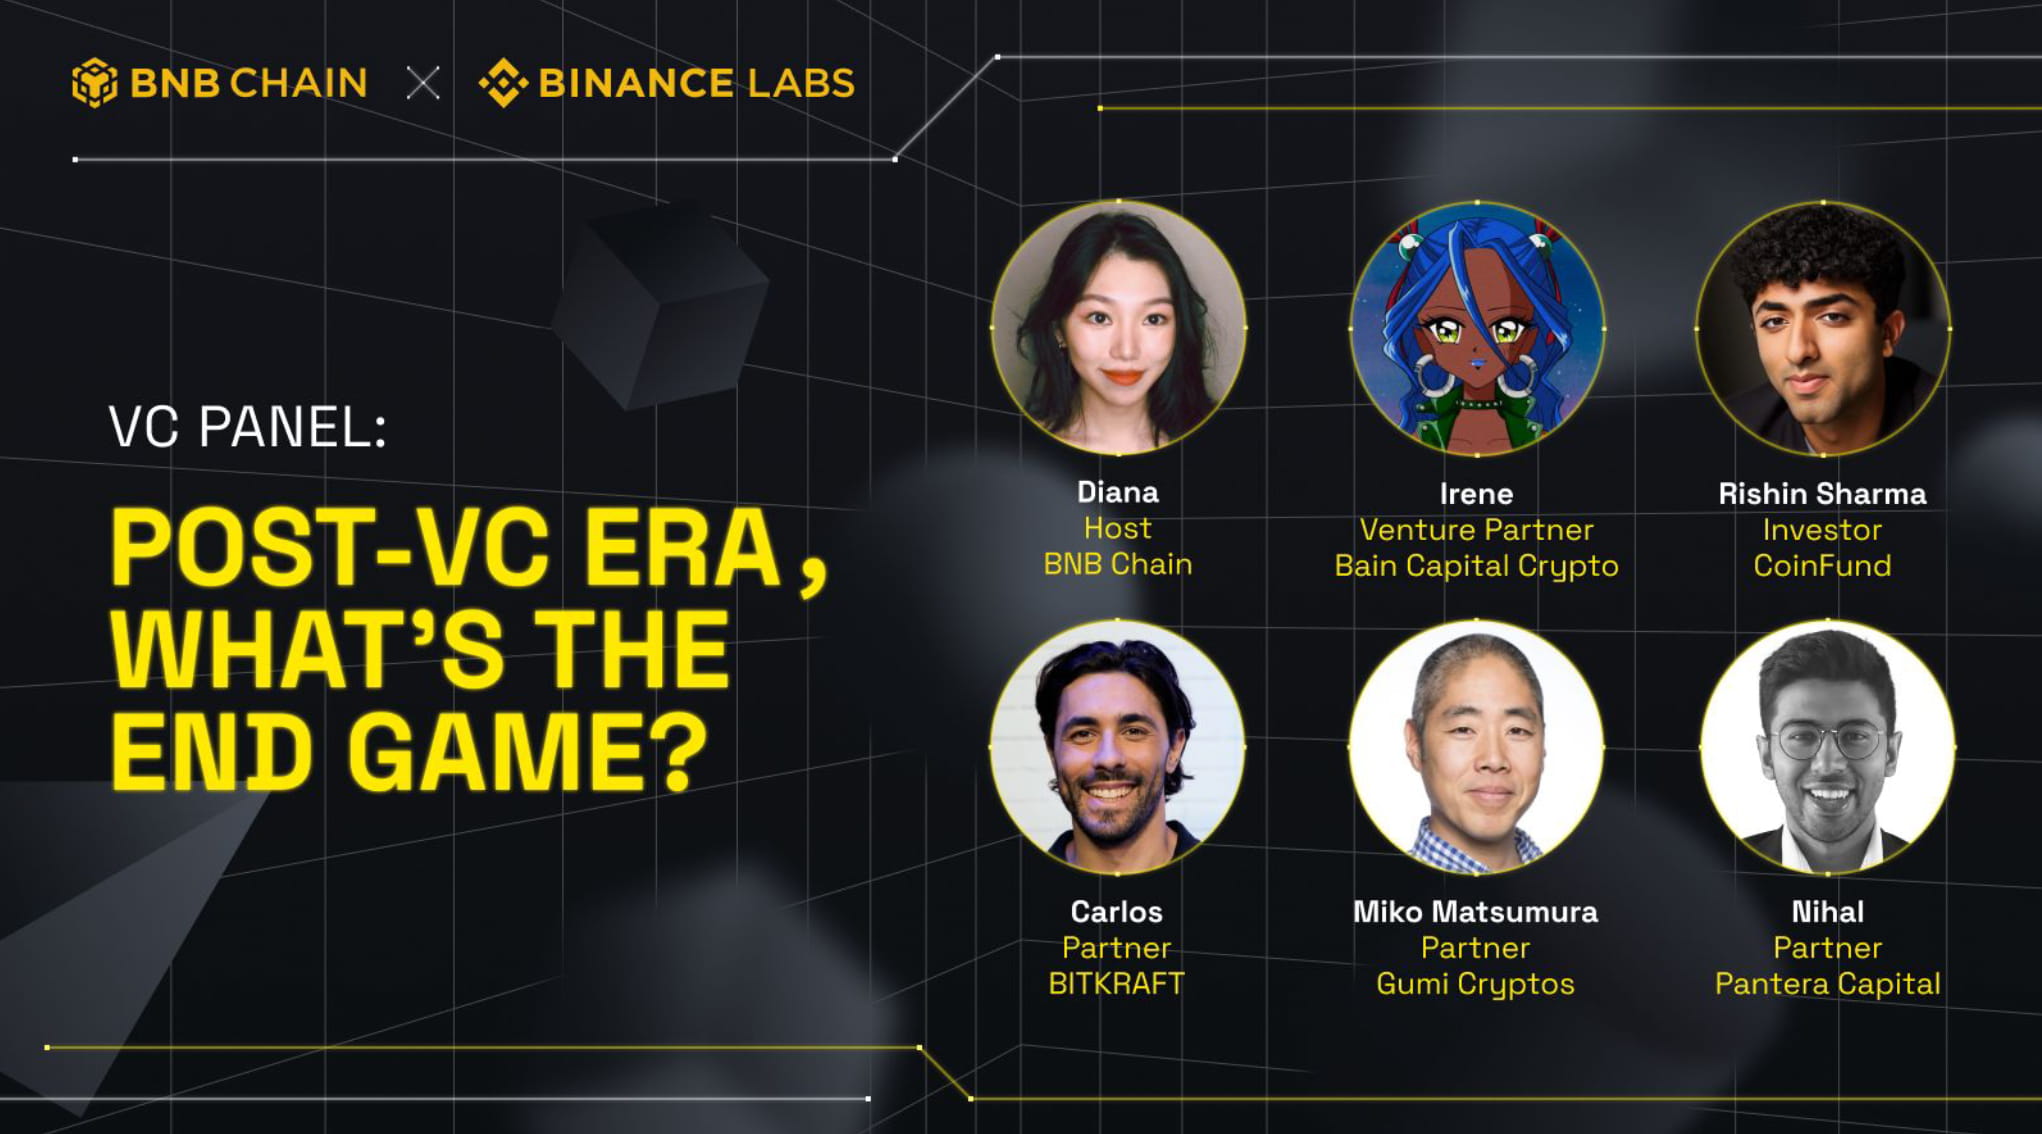 BNB BIA: Post-VC Era, What's the End Game?